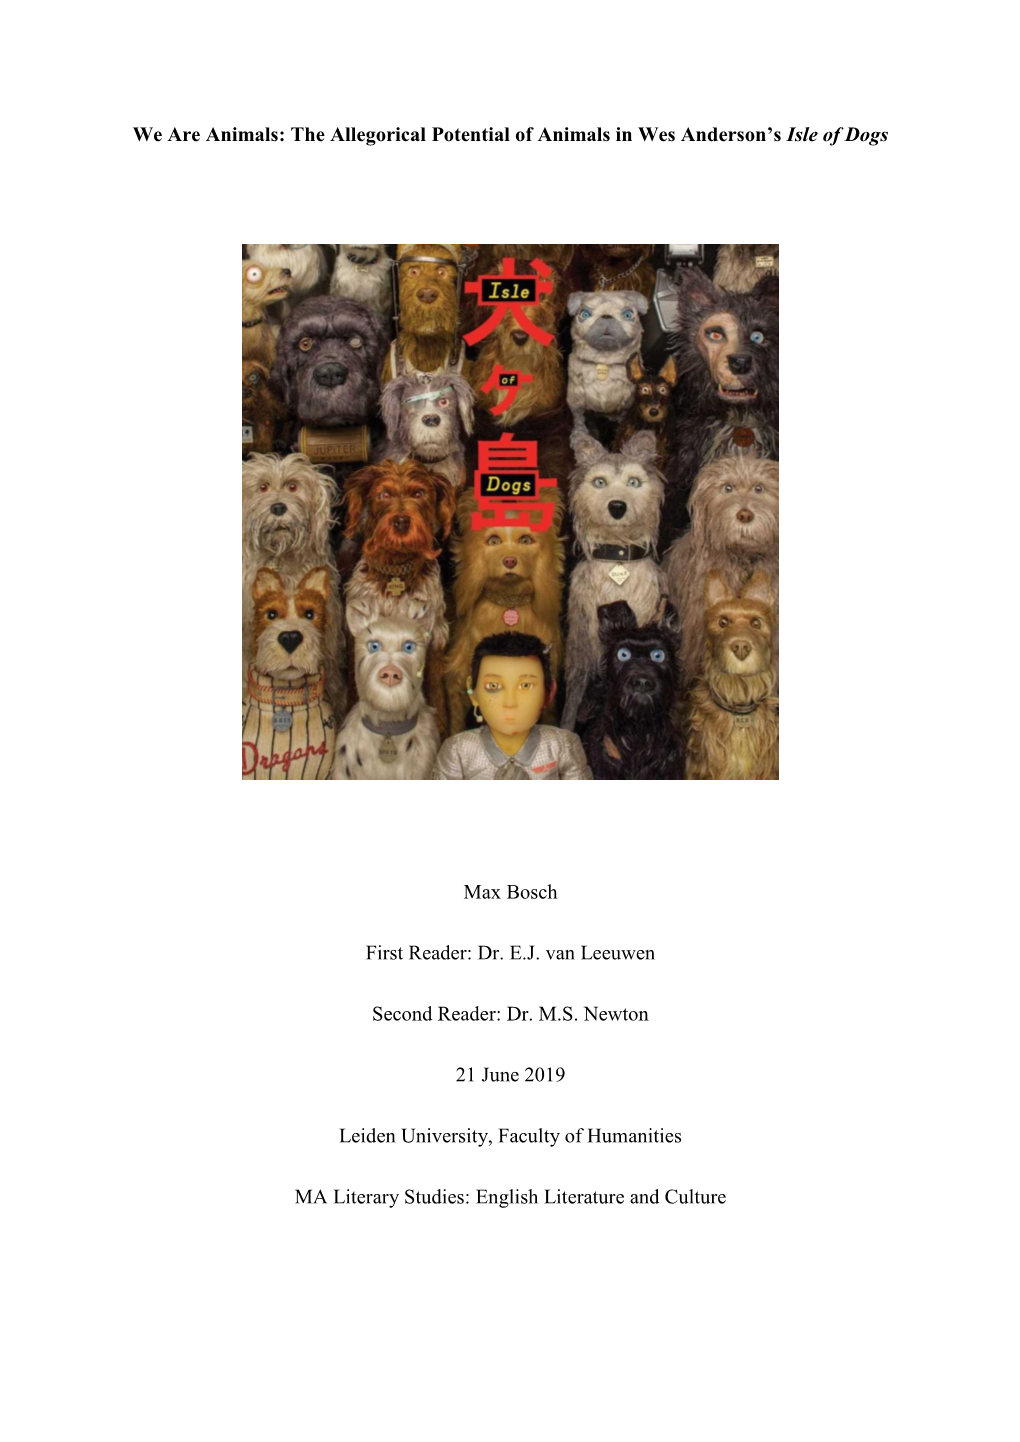 The Allegorical Potential of Animals in Wes Anderson's Isle of Dogs Max